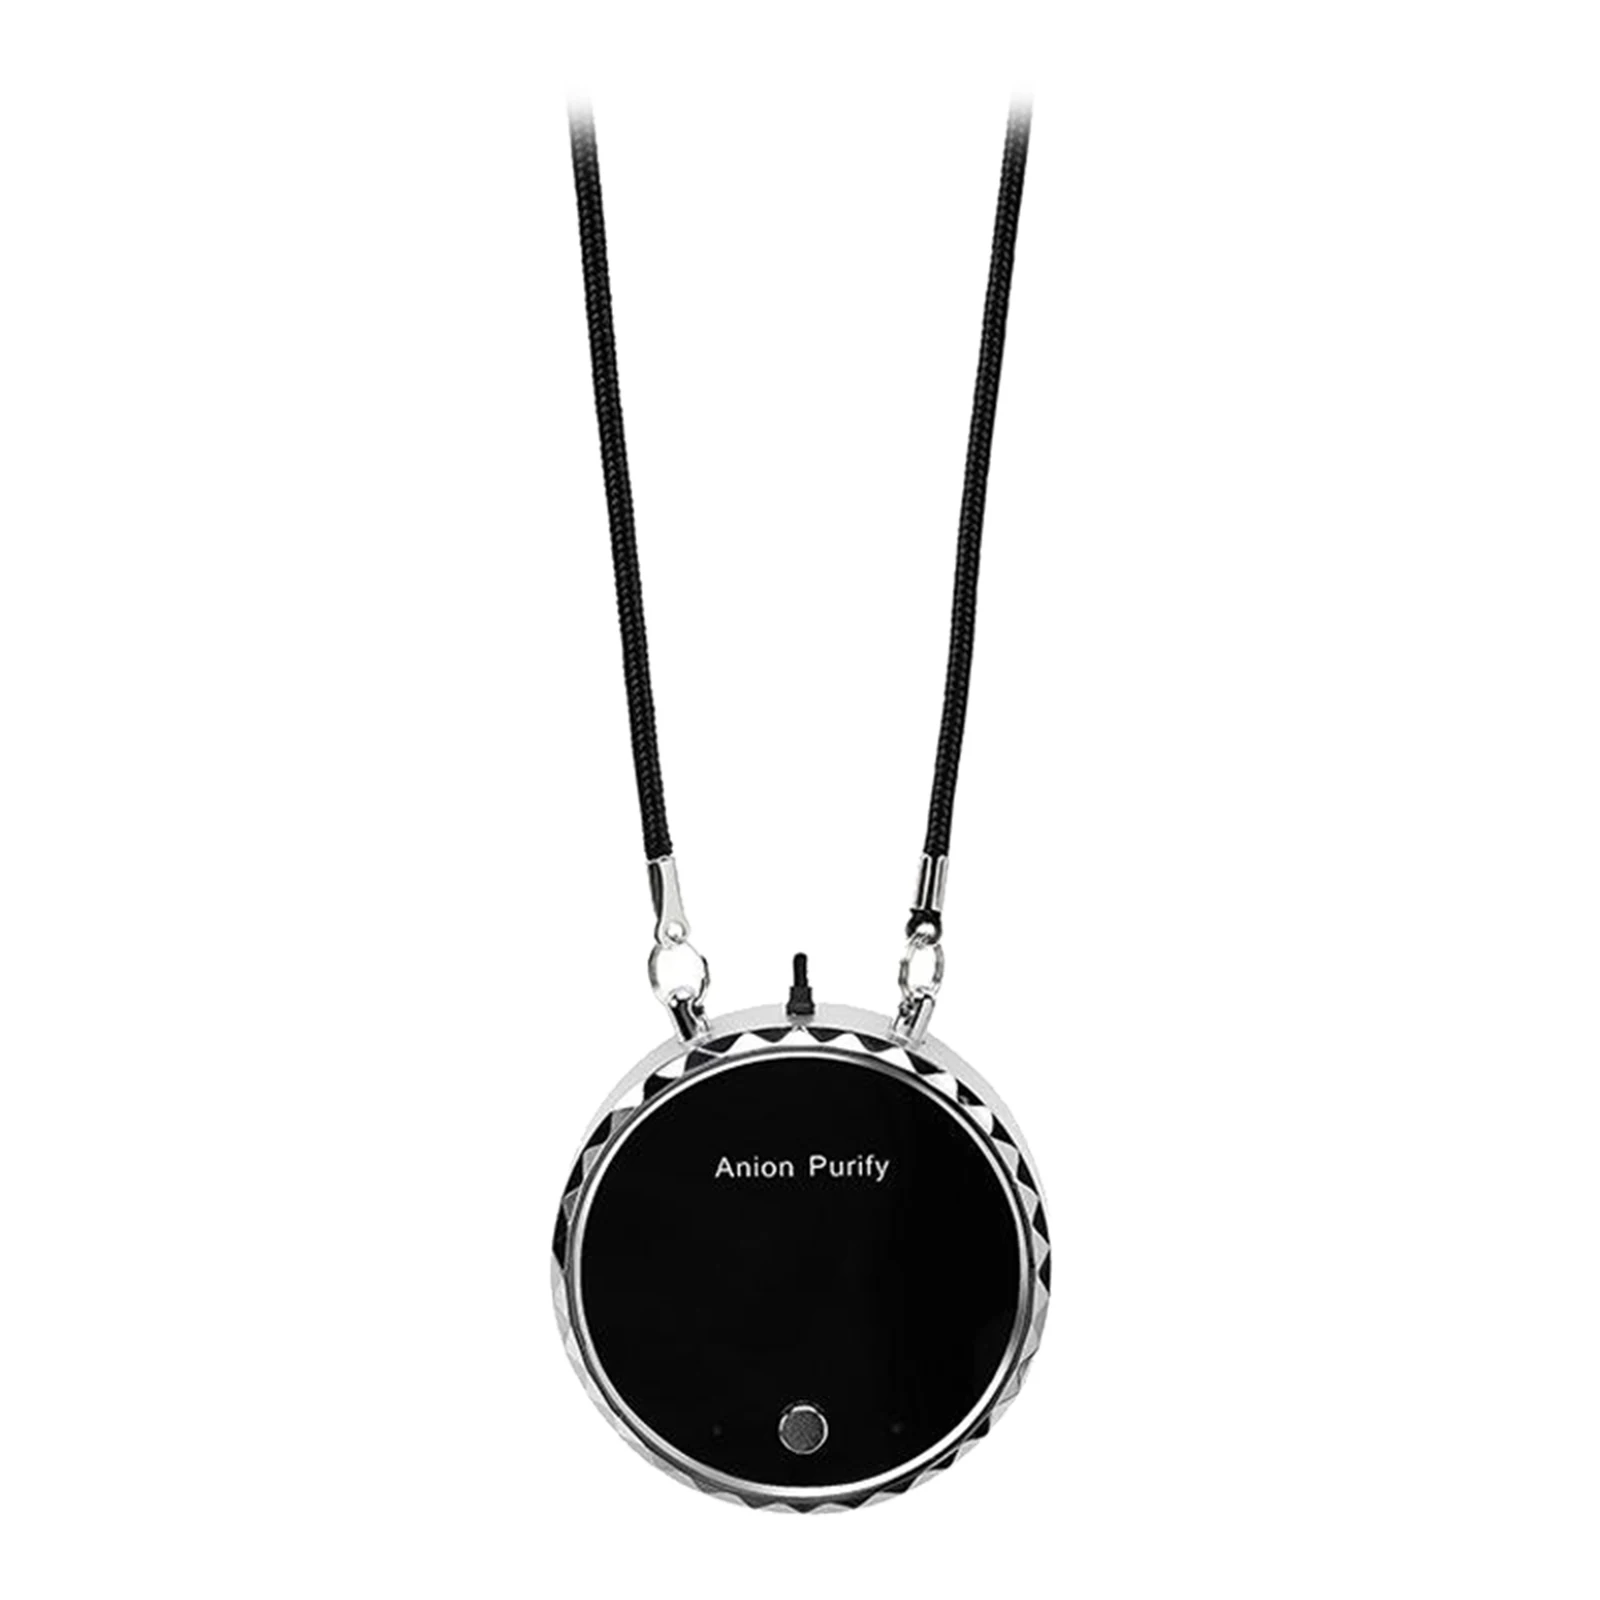 

Wearable Personal , Necklace Around The Neck, Travel Size Generator, Remove Smoke Smell